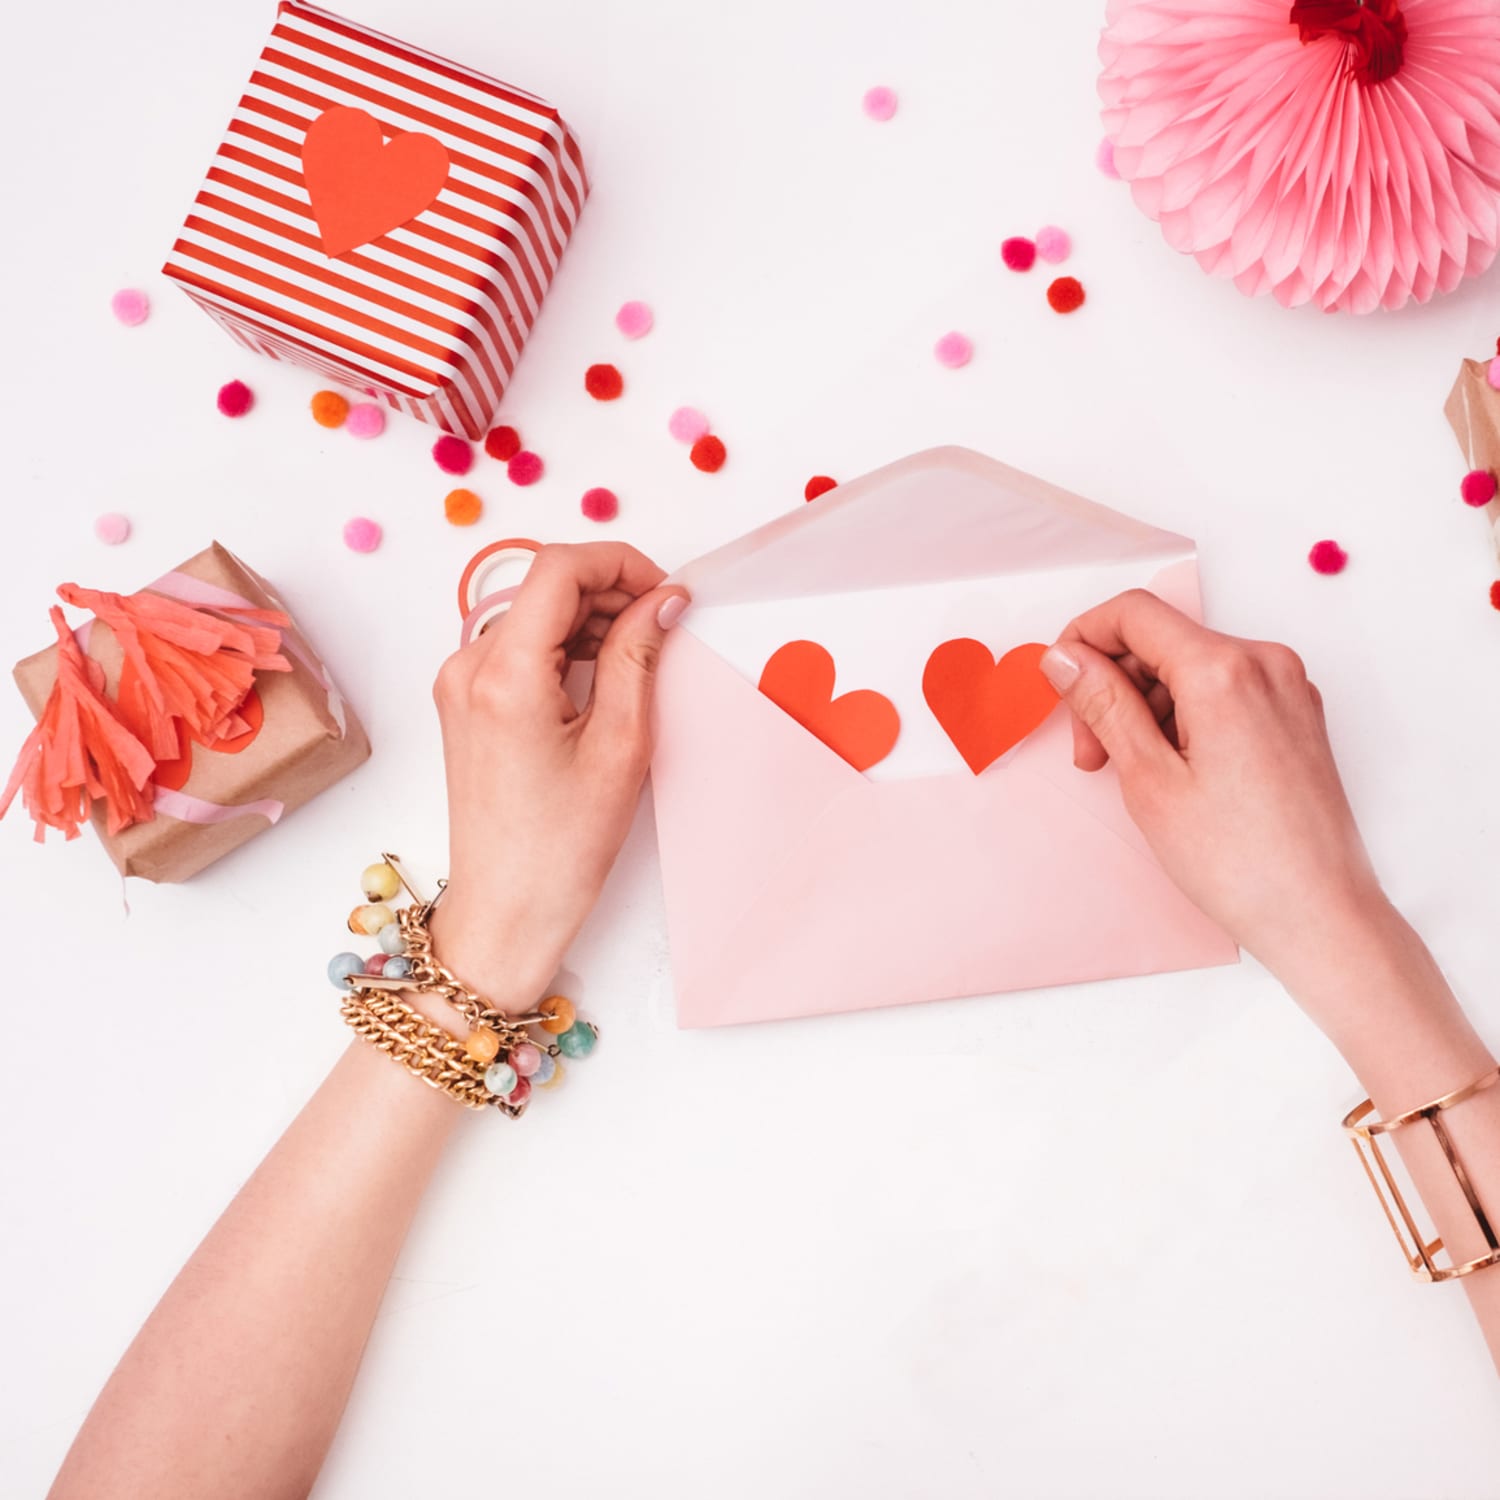 Thoughtful Last-Minute Valentine's Day Gifts for Her